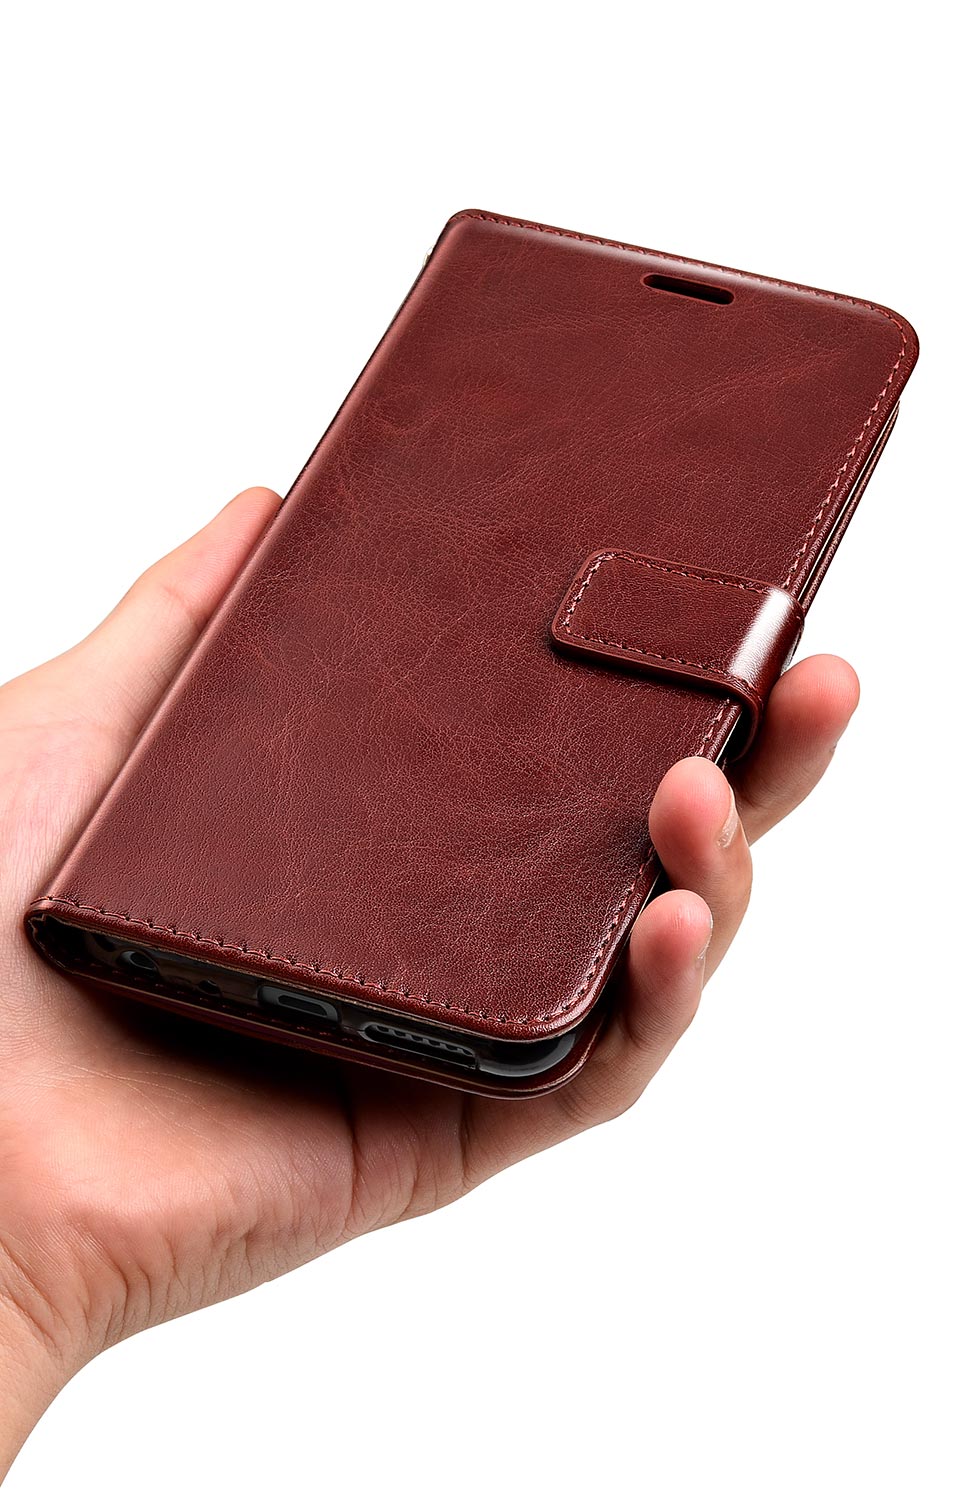 Leather case For Samsung Galaxy A11 Case Back Cover Phone Flip Case on For Samsung Galaxy A11 A 11 A115F